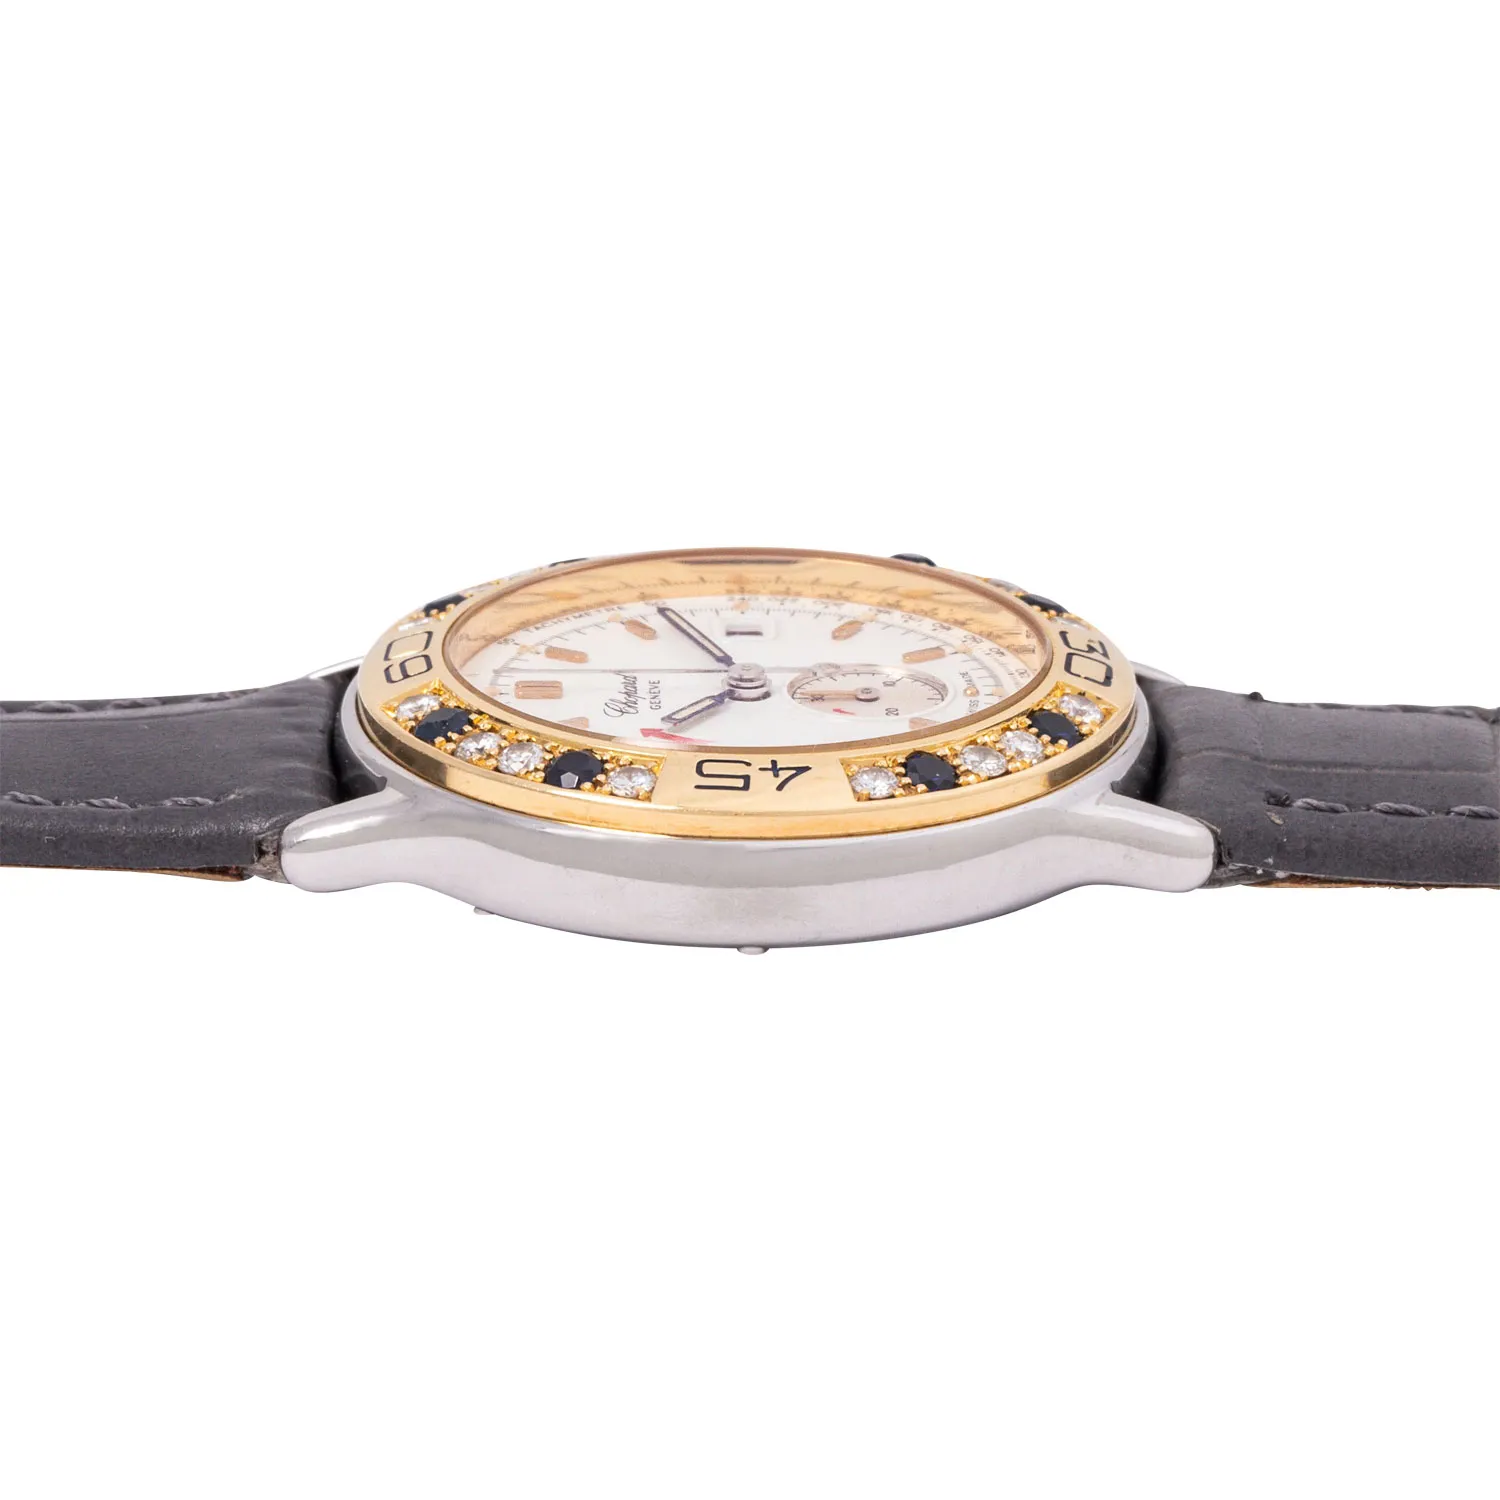 Chopard Mille Miglia 8175 31mm Stainless steel, yellow gold, diamon and sapphire-set 4